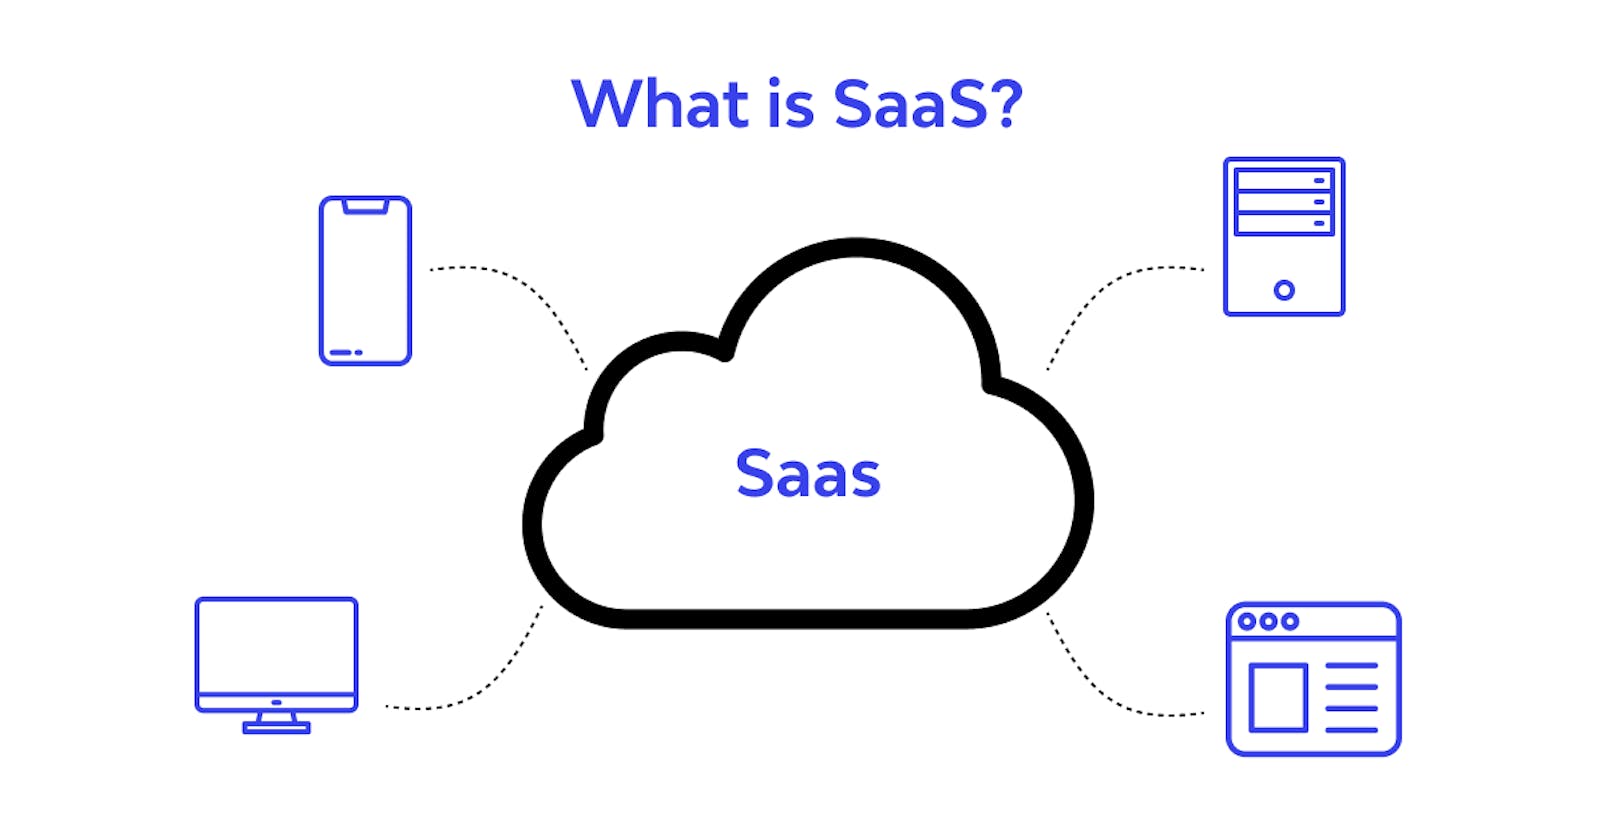 Guide to writing Software as a Service (SaaS) Applications